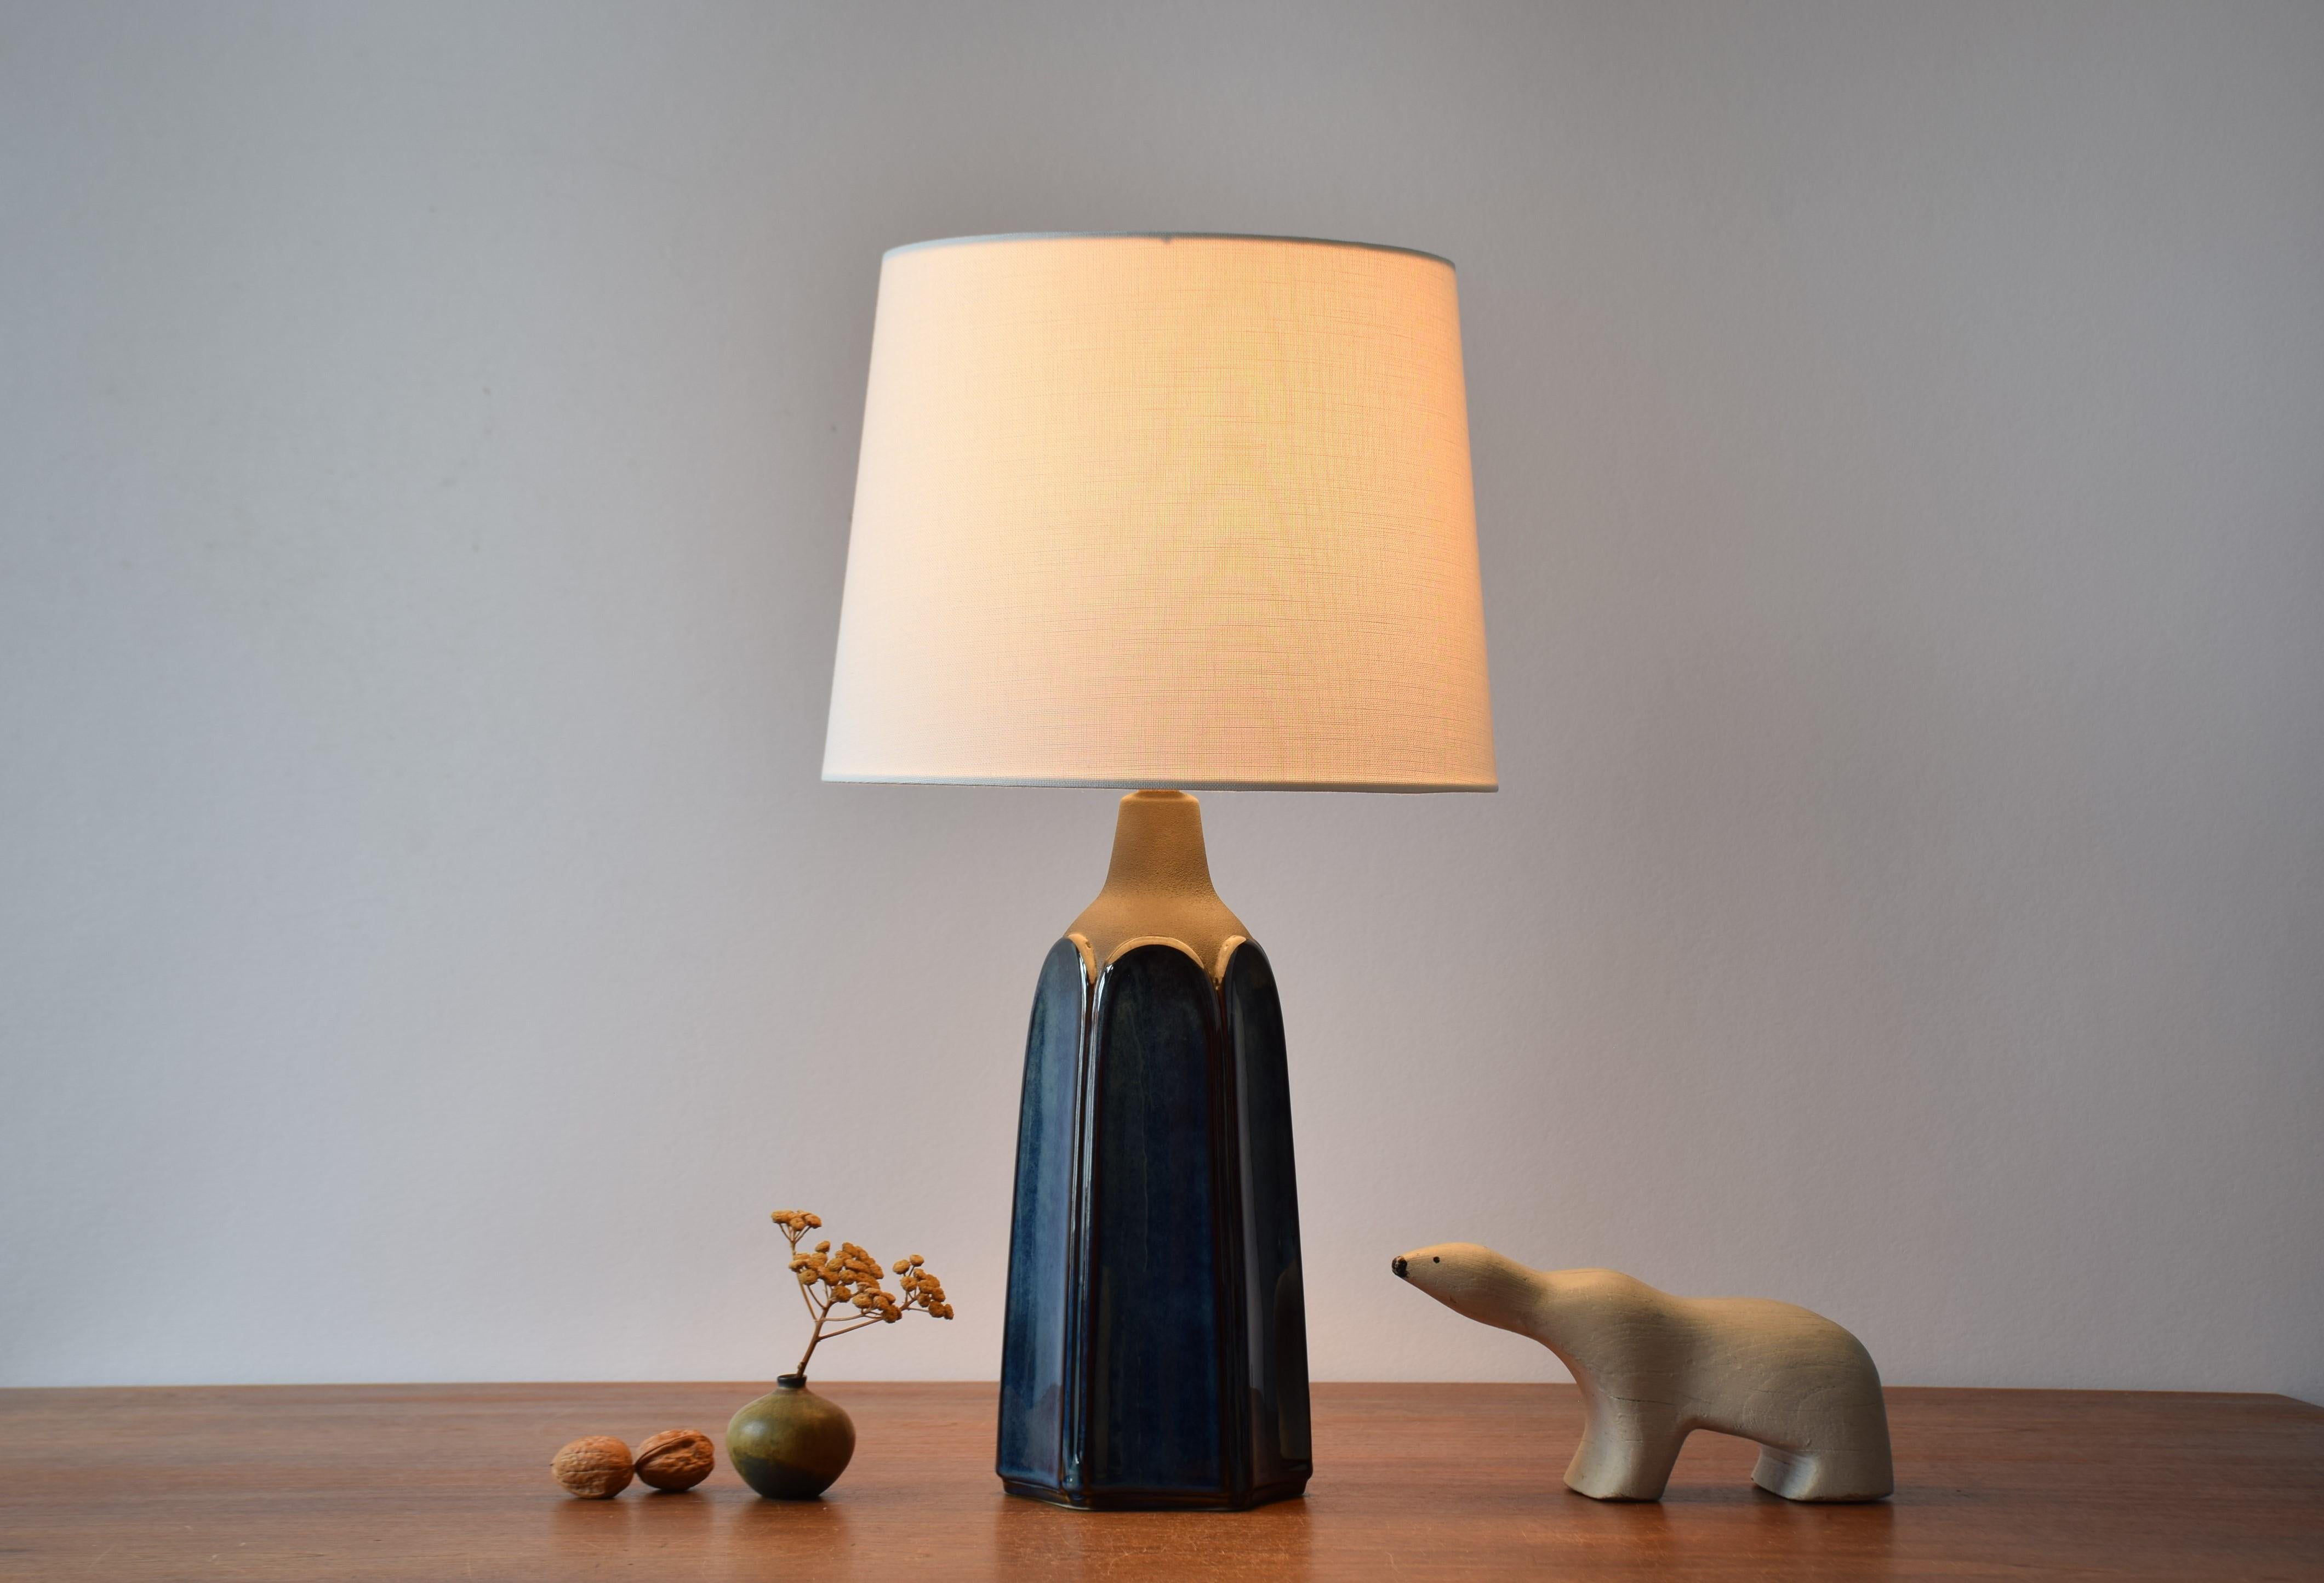 Sculptural table lamp by Einar Johansen for Søholm Stentøj, Denmark, circa 1960s.
The sculptural shape and the shiny blue glaze with brown elements gives the lamp a very vivid expression.

Included is a new lamp shade designed and made in